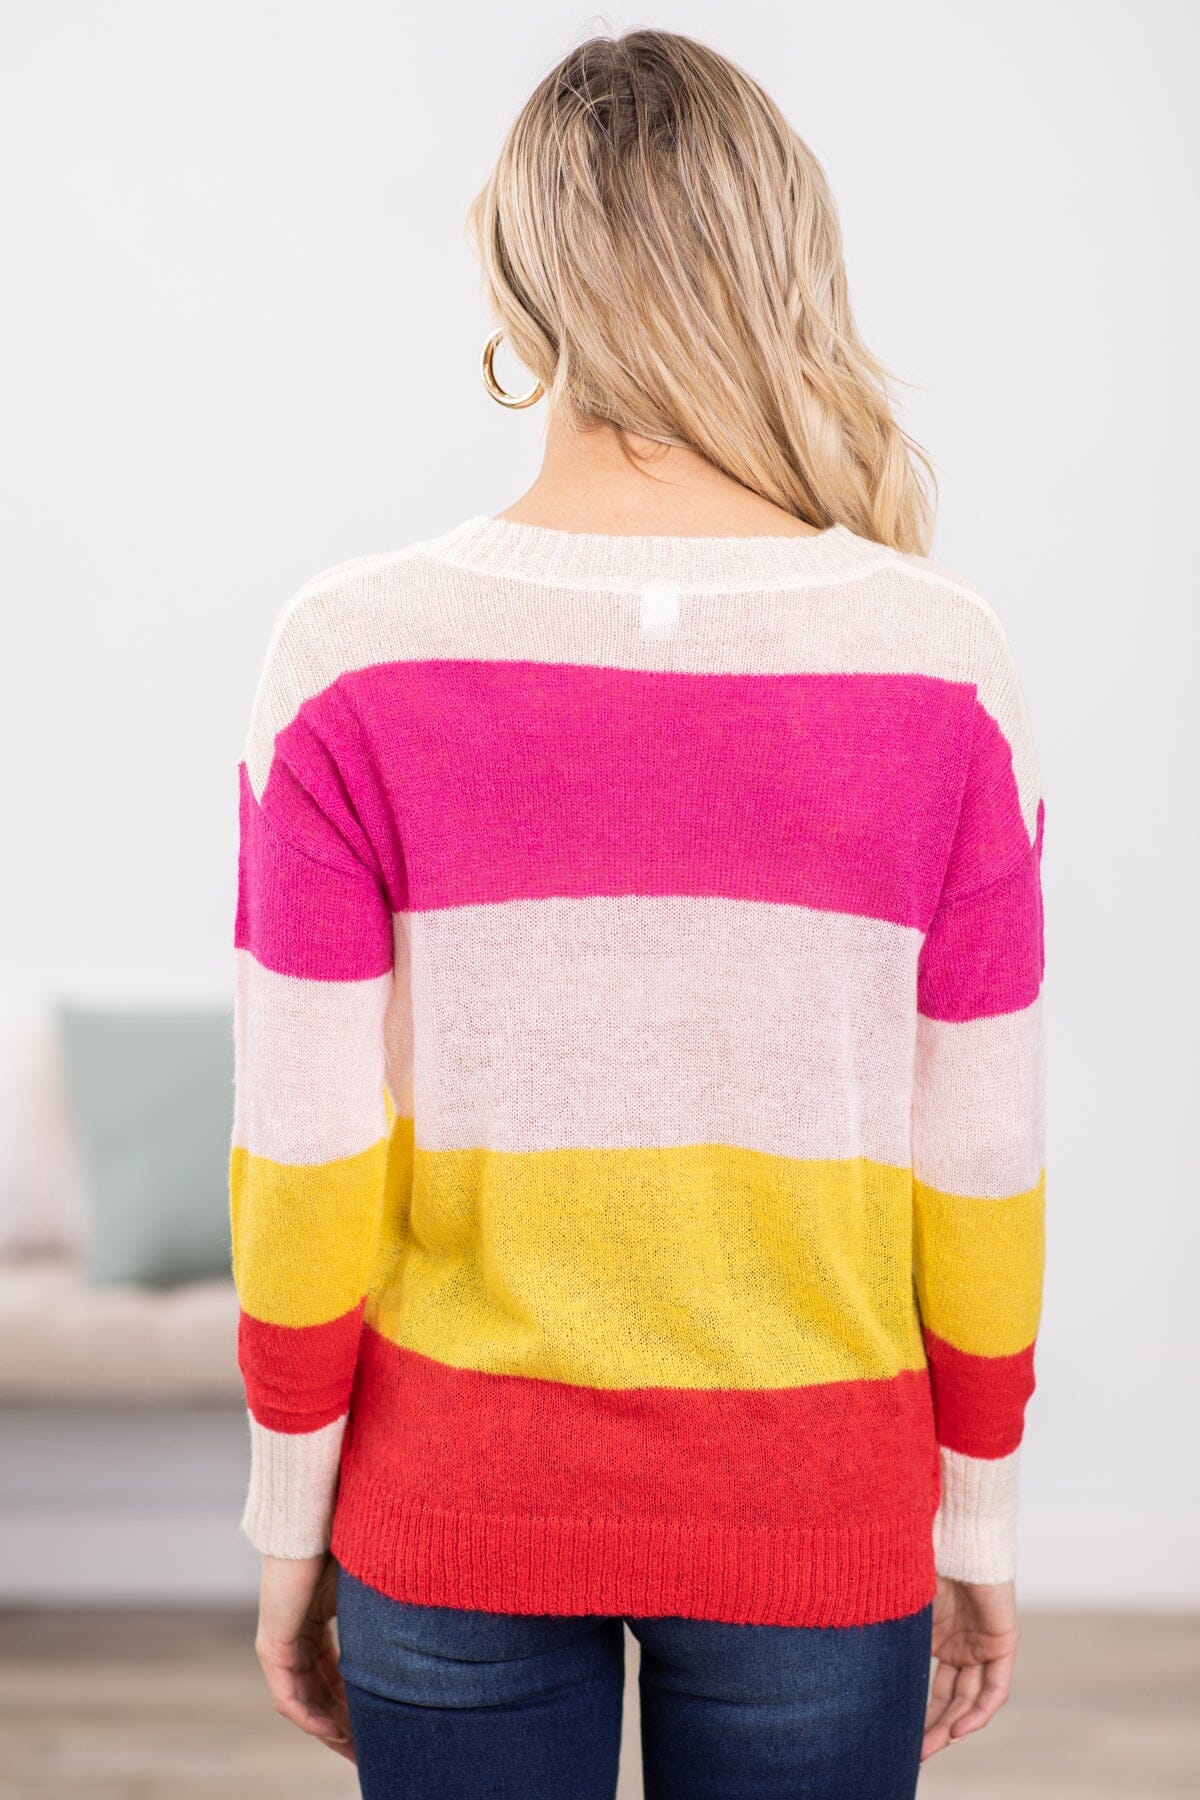 Hot Pink and Yellow Colorblock Sweater - Filly Flair